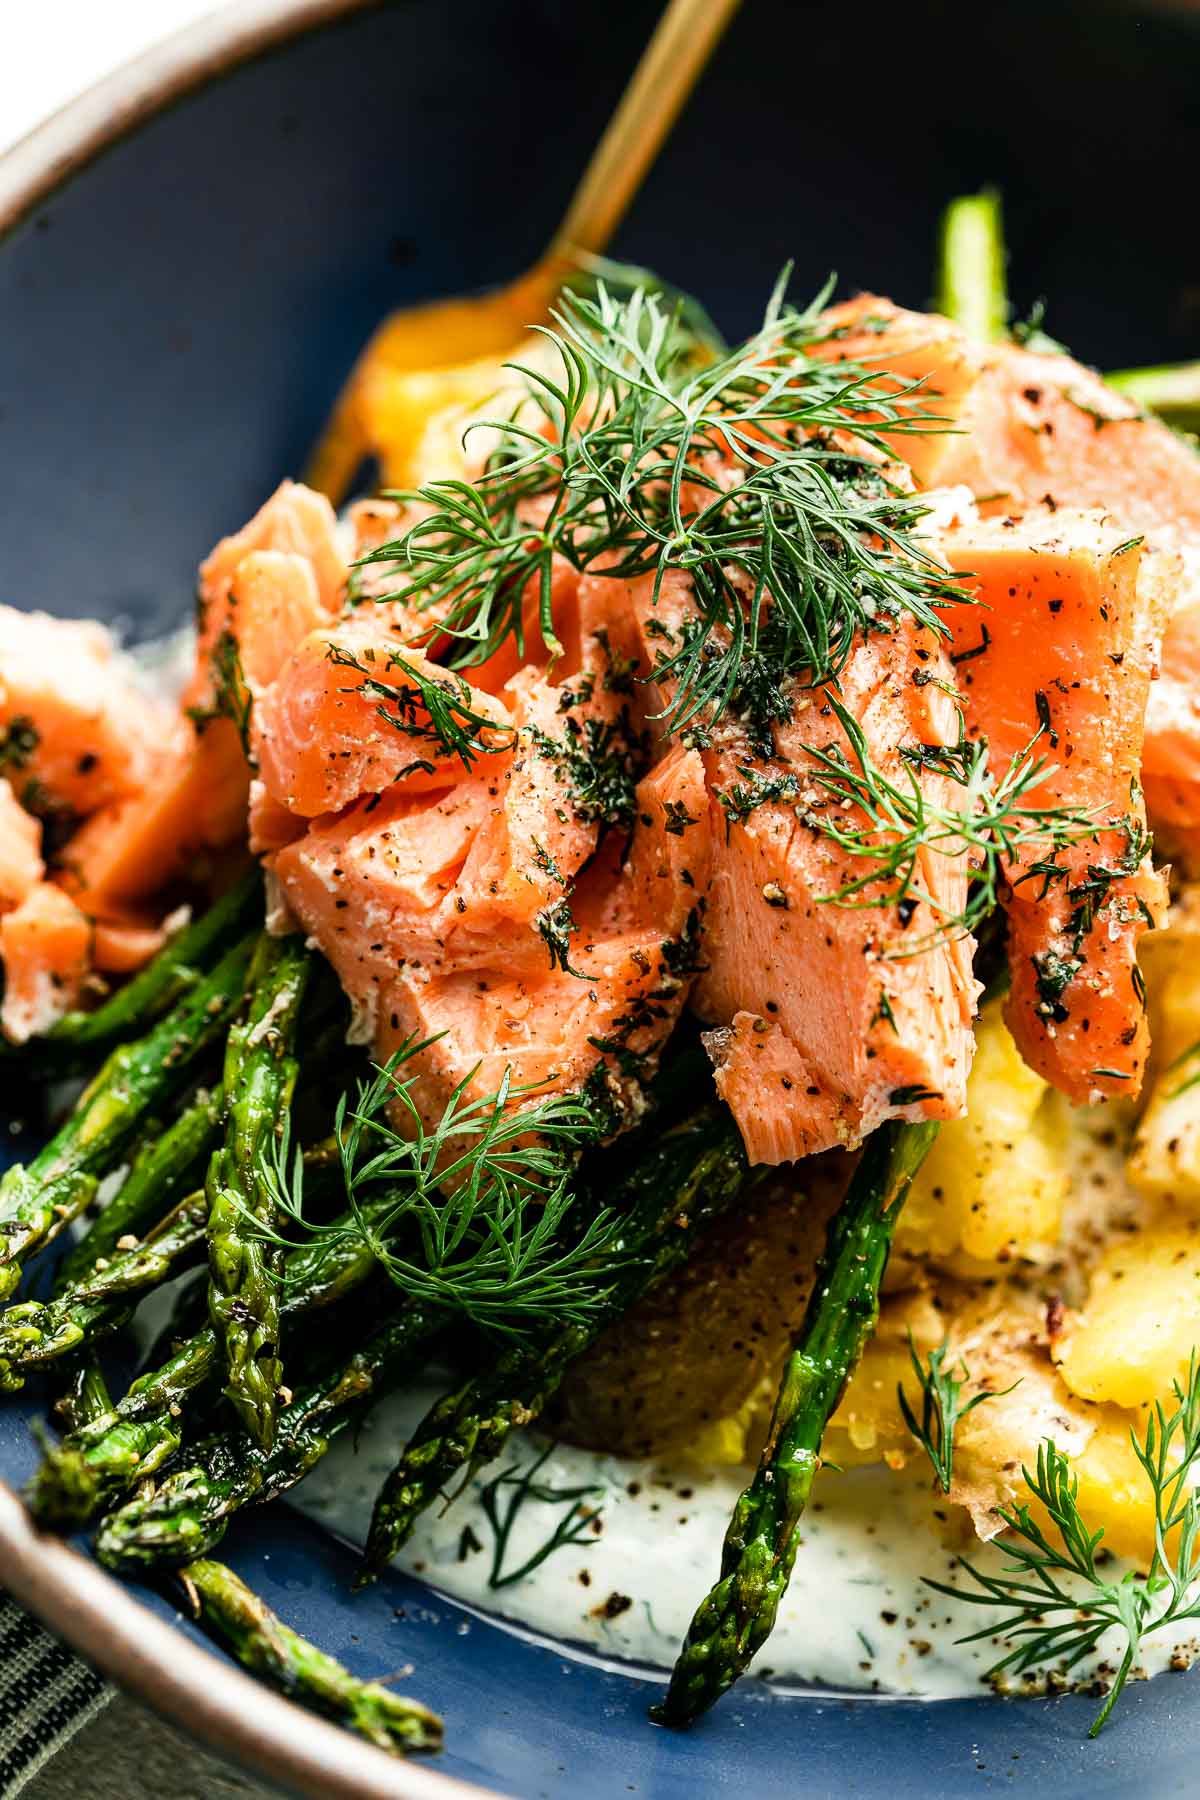 Sheet pan salmon and asparagus with crispy smashed potatoes are served in a blue ceramic bowl with a gold fork and topped with fresh ground pepper and fresh dill.